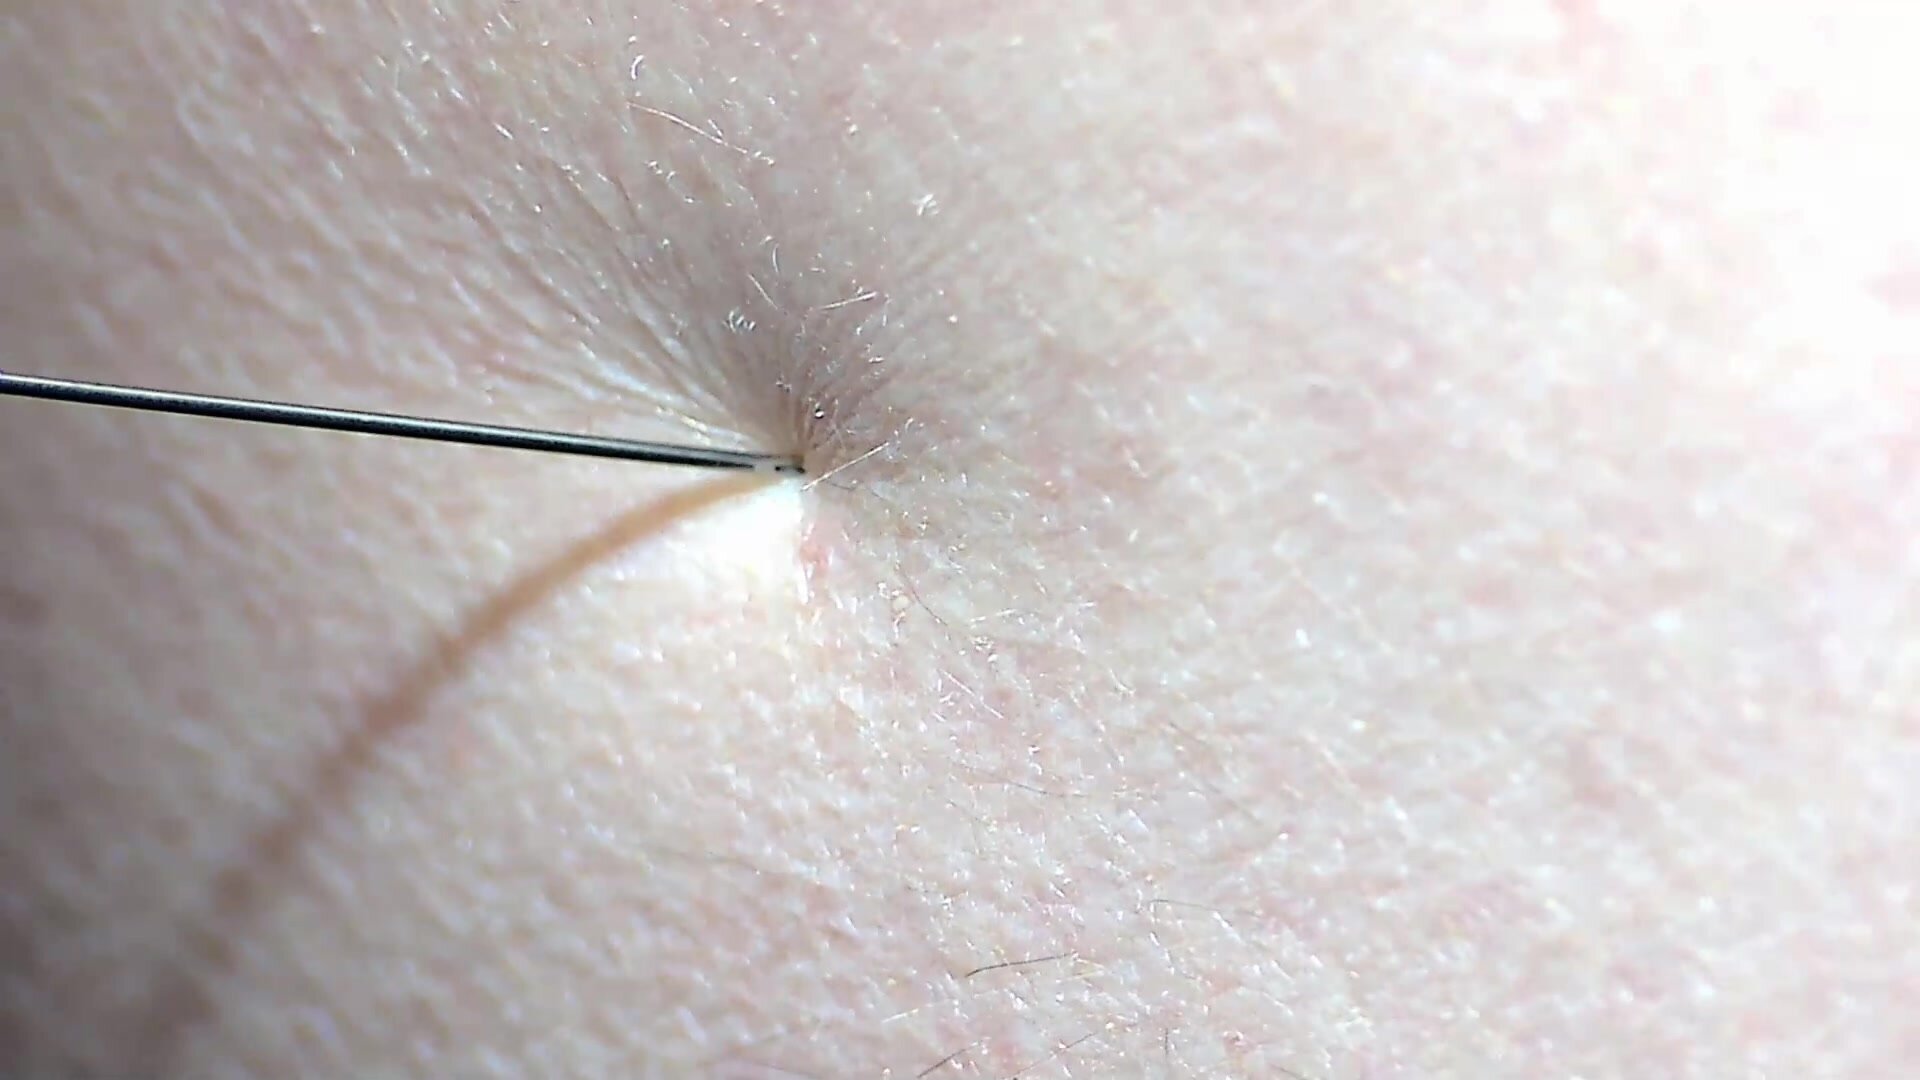 Injection in buttock (Extreme Closeup)